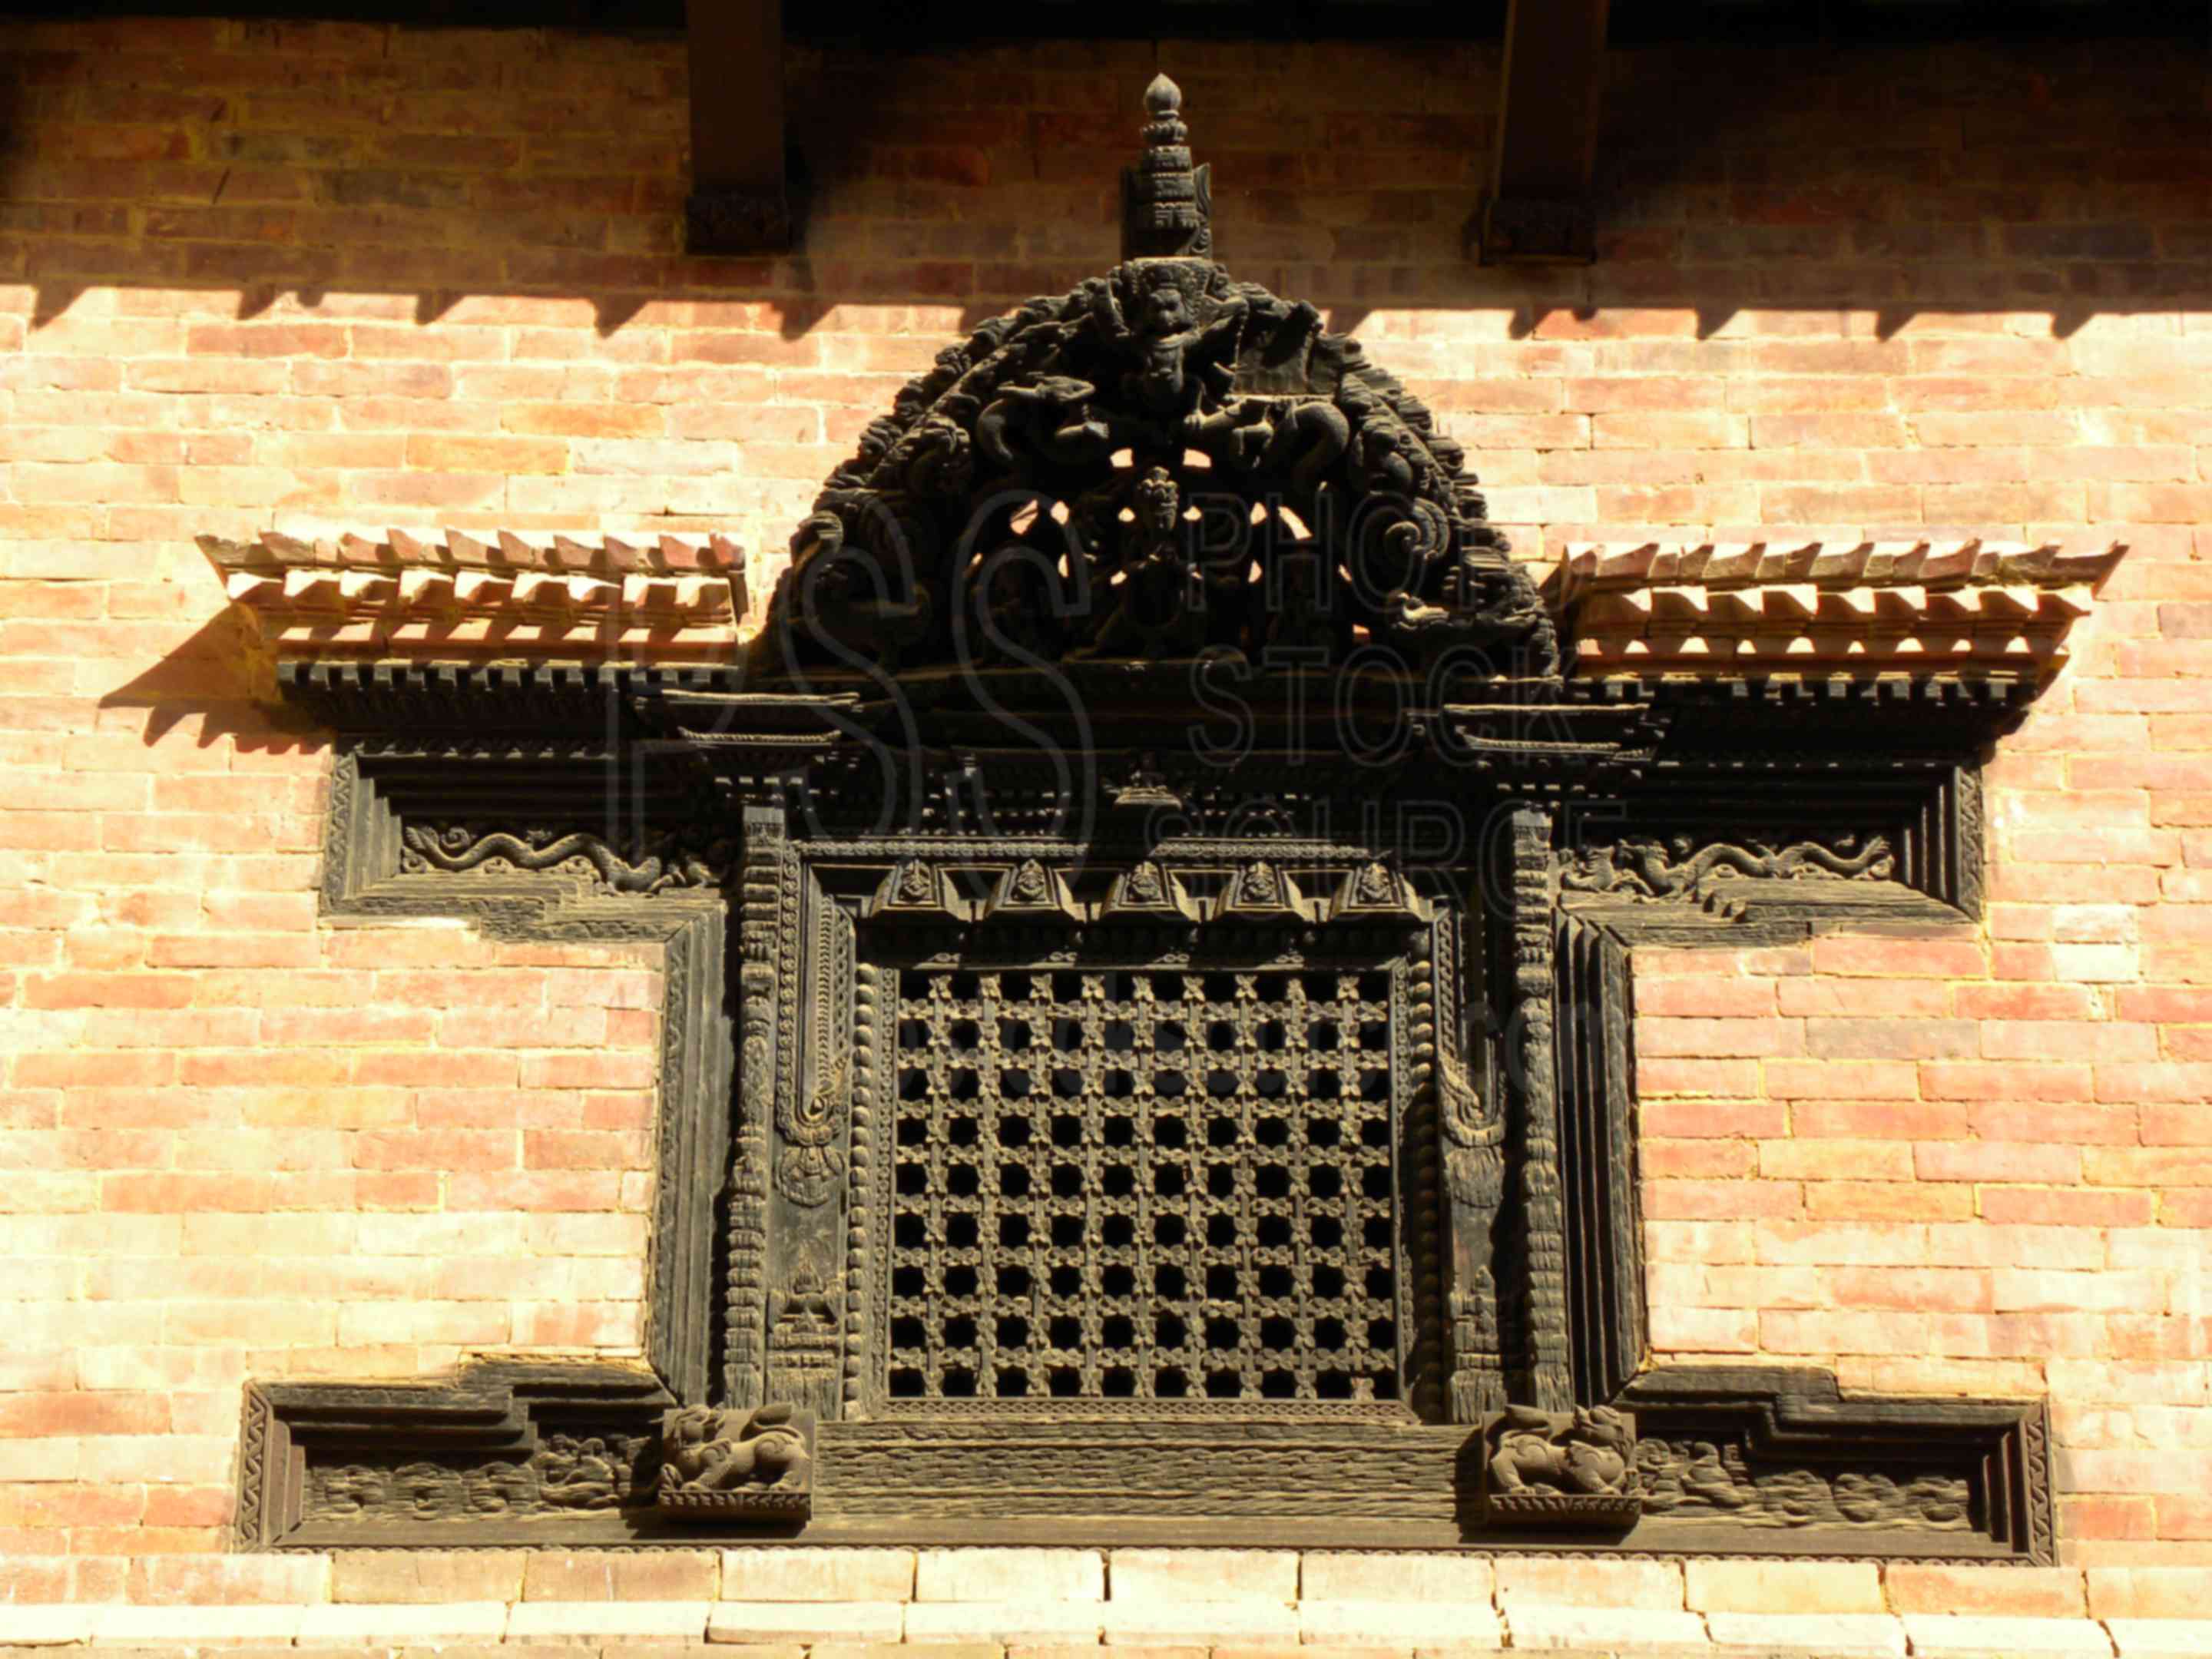 55 Window Palace,window,carved,wood,wooden,royal palace,durbar square,doors windows